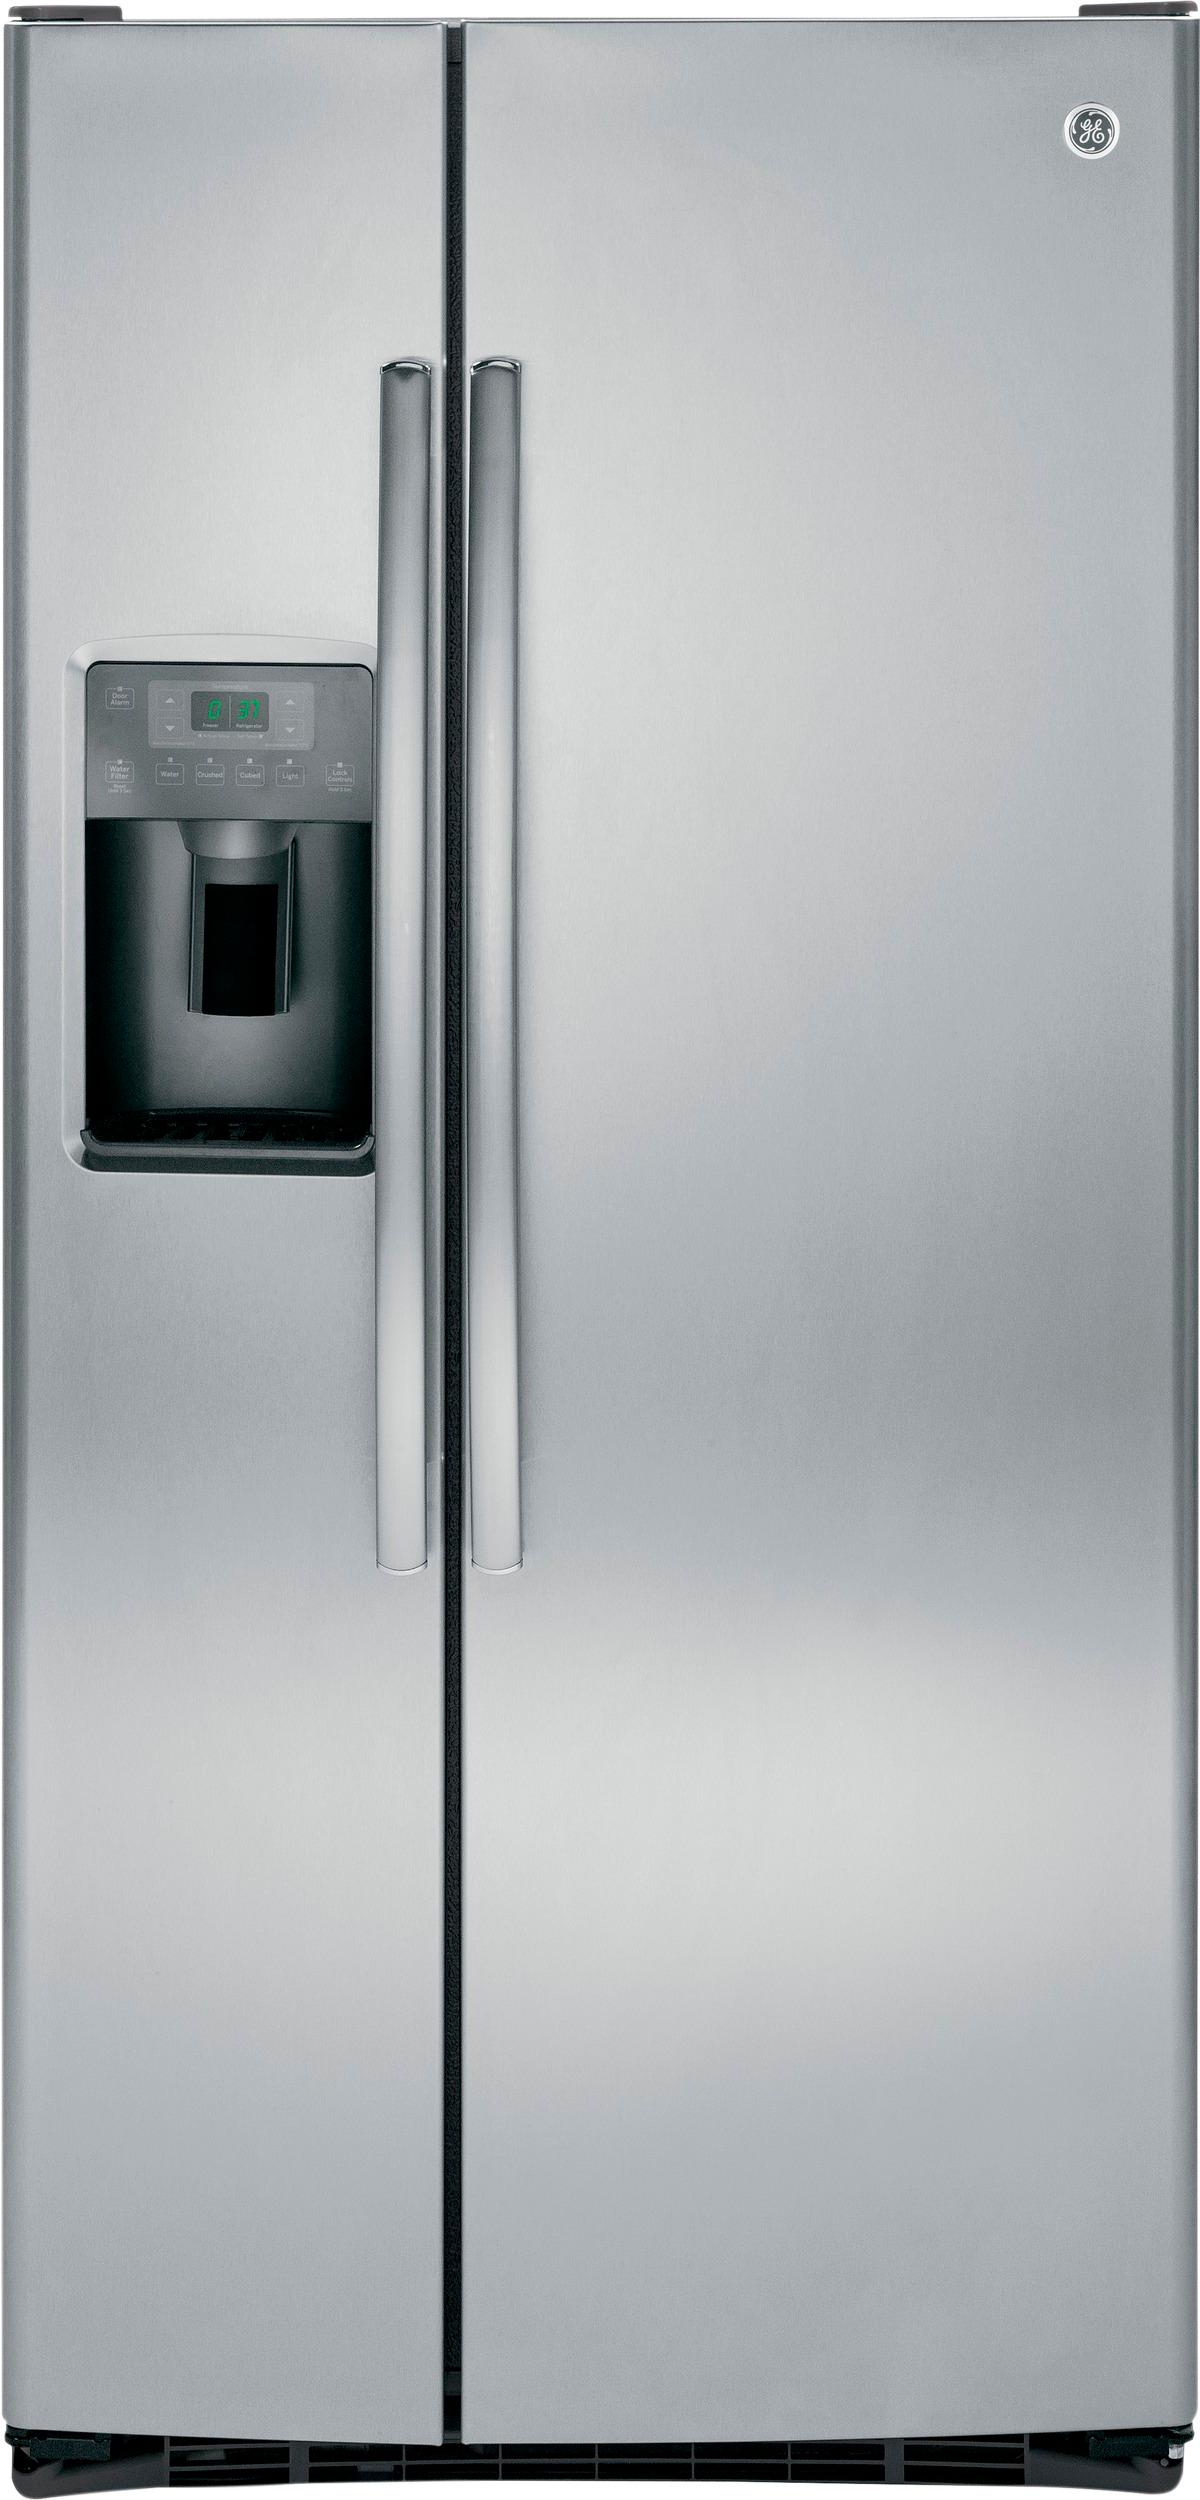 GE 23.0 Cu. Ft. Side-by-Side Refrigerator with External Ice  - Best Buy